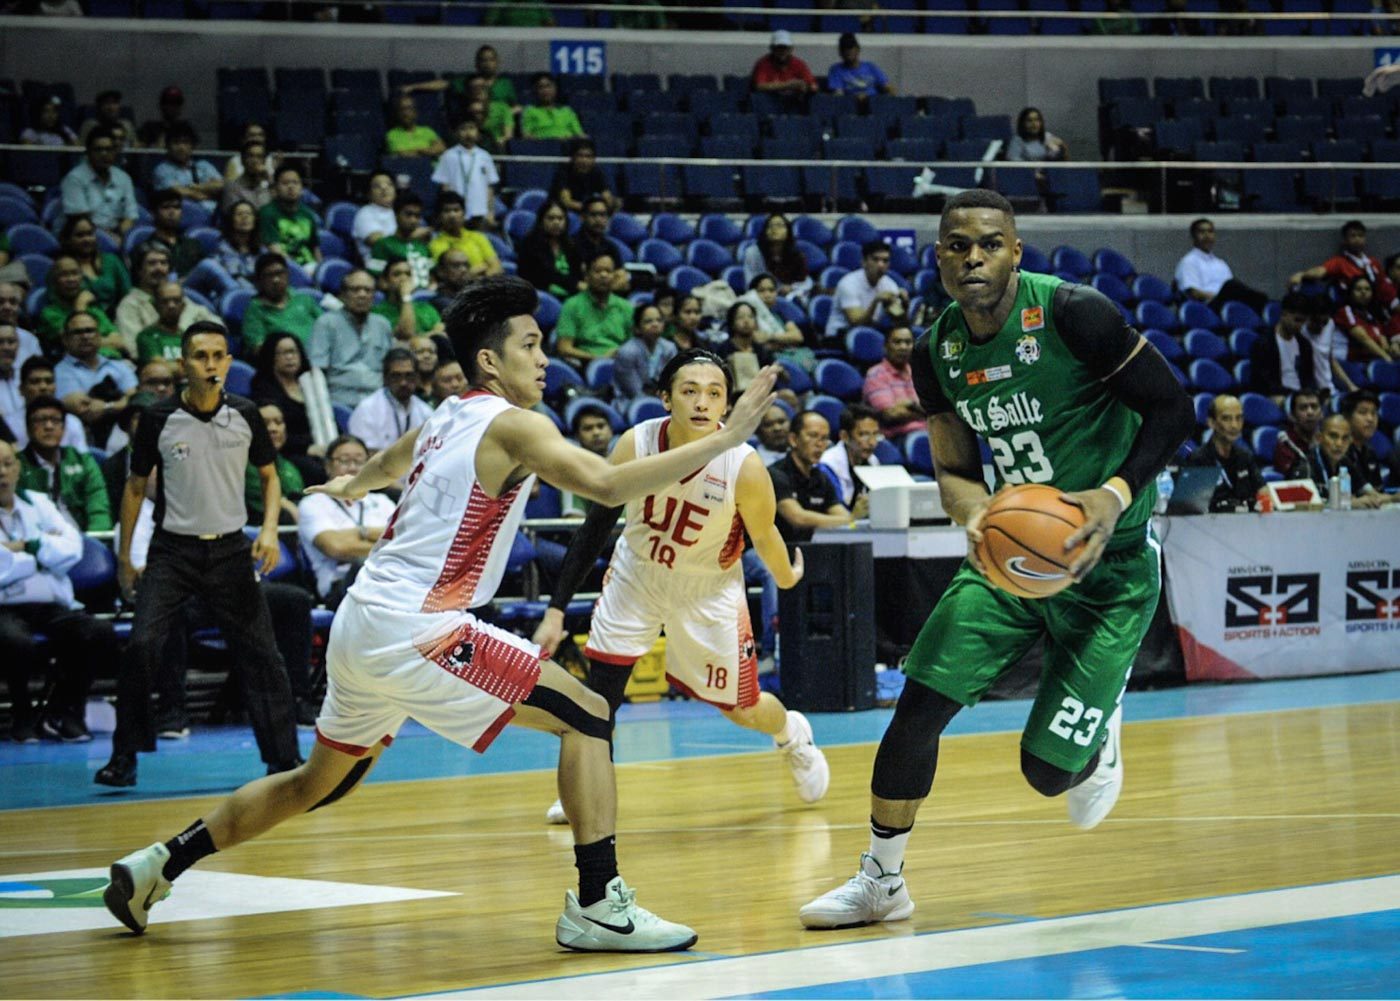 Green Archers clinch final 4 berth, UE in danger of falling out of contention